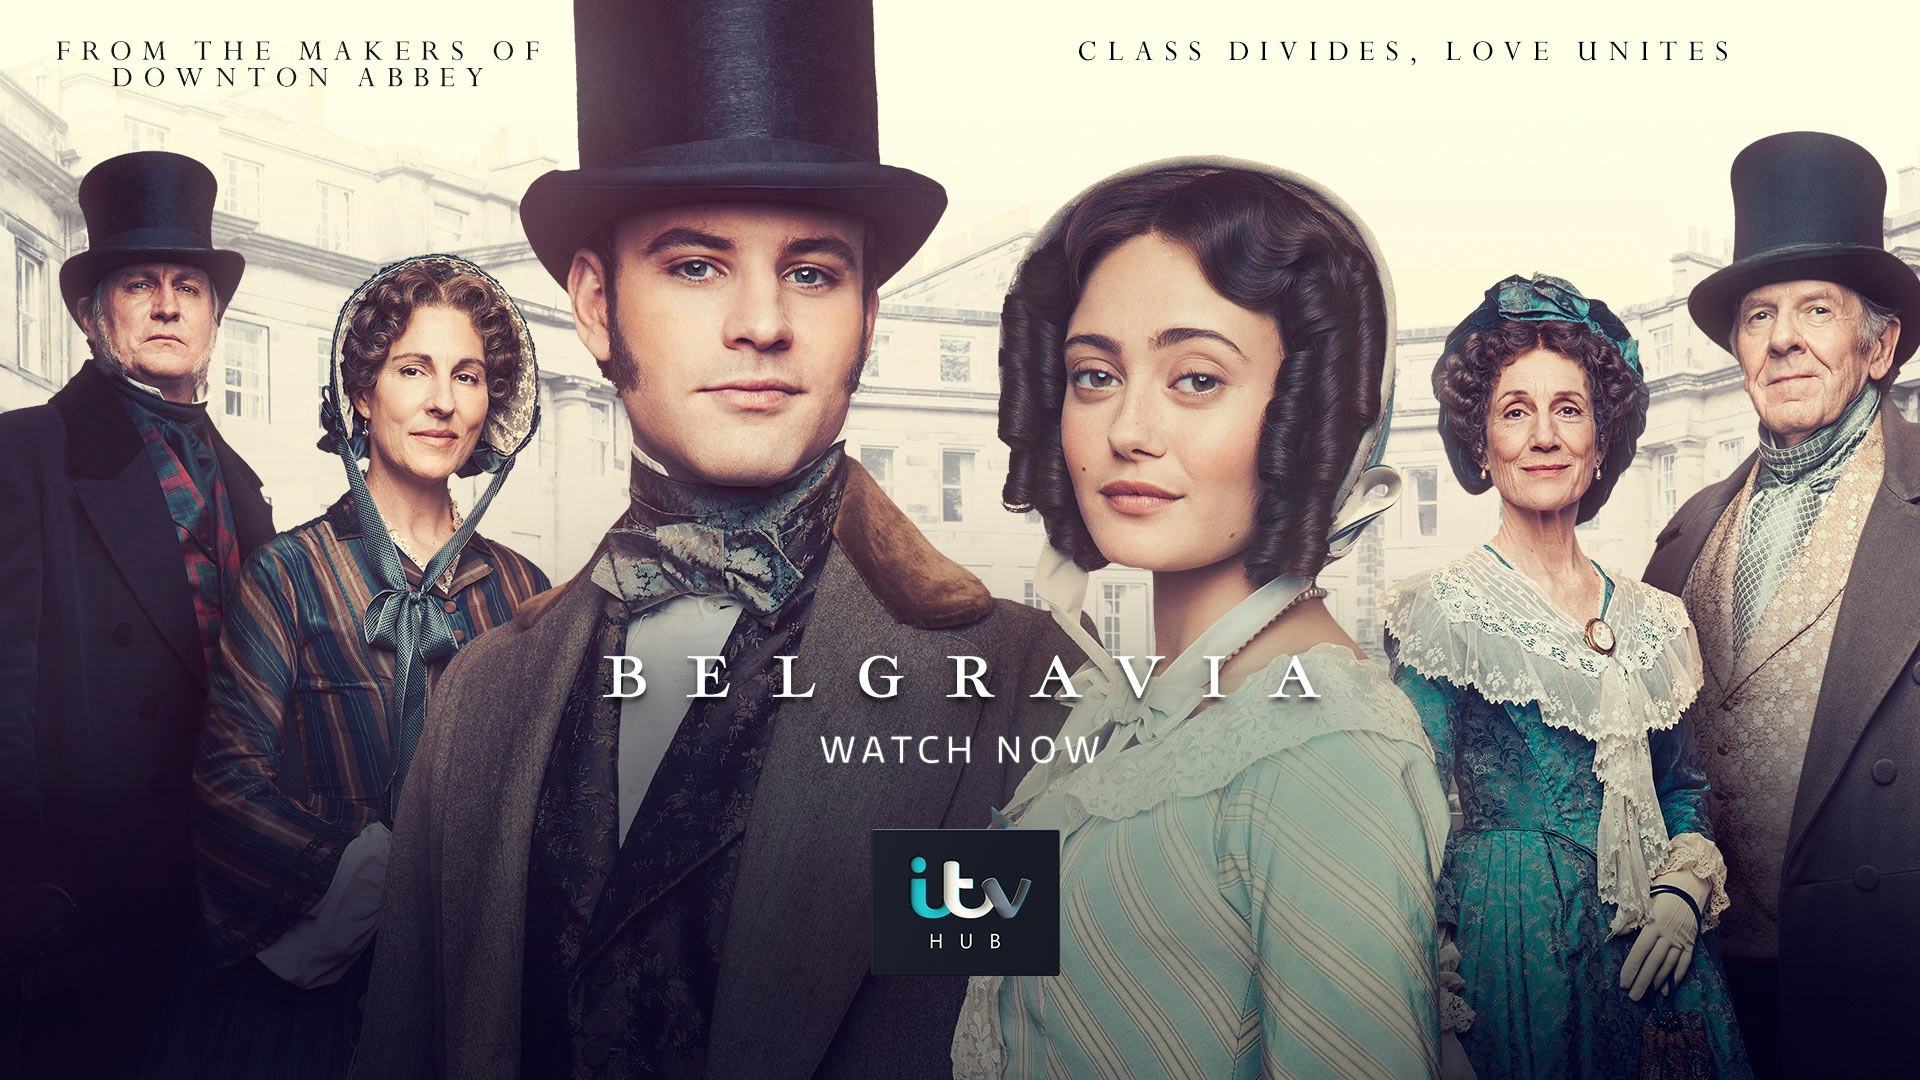 Jason Ford - Belgravia Out of Home Advertising ITV Hub